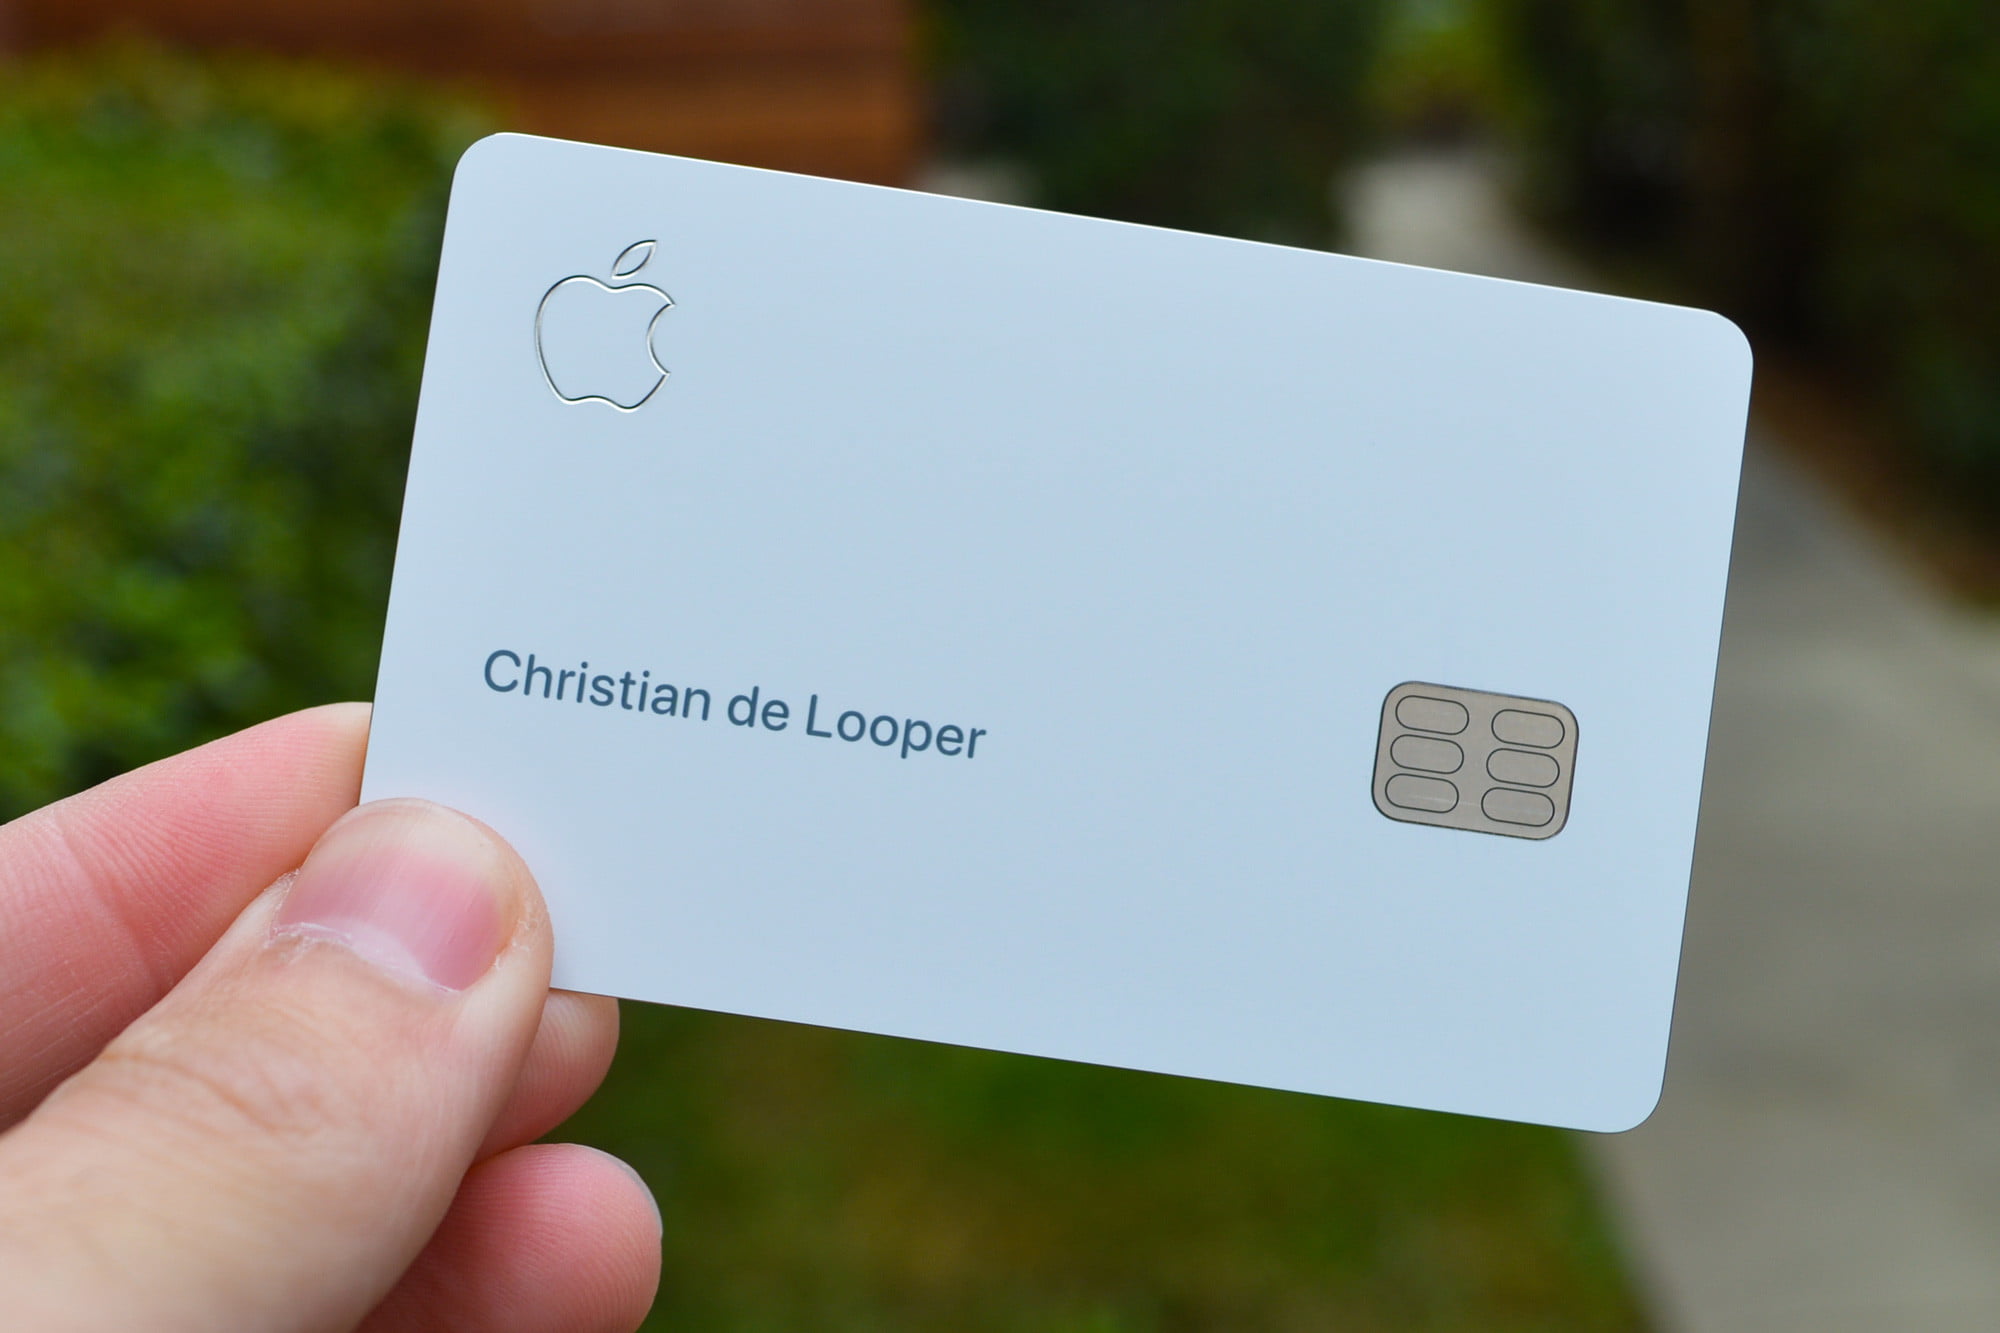 Goldman Sachs to reevaluate Apple Card credit limits after allegations of sexism